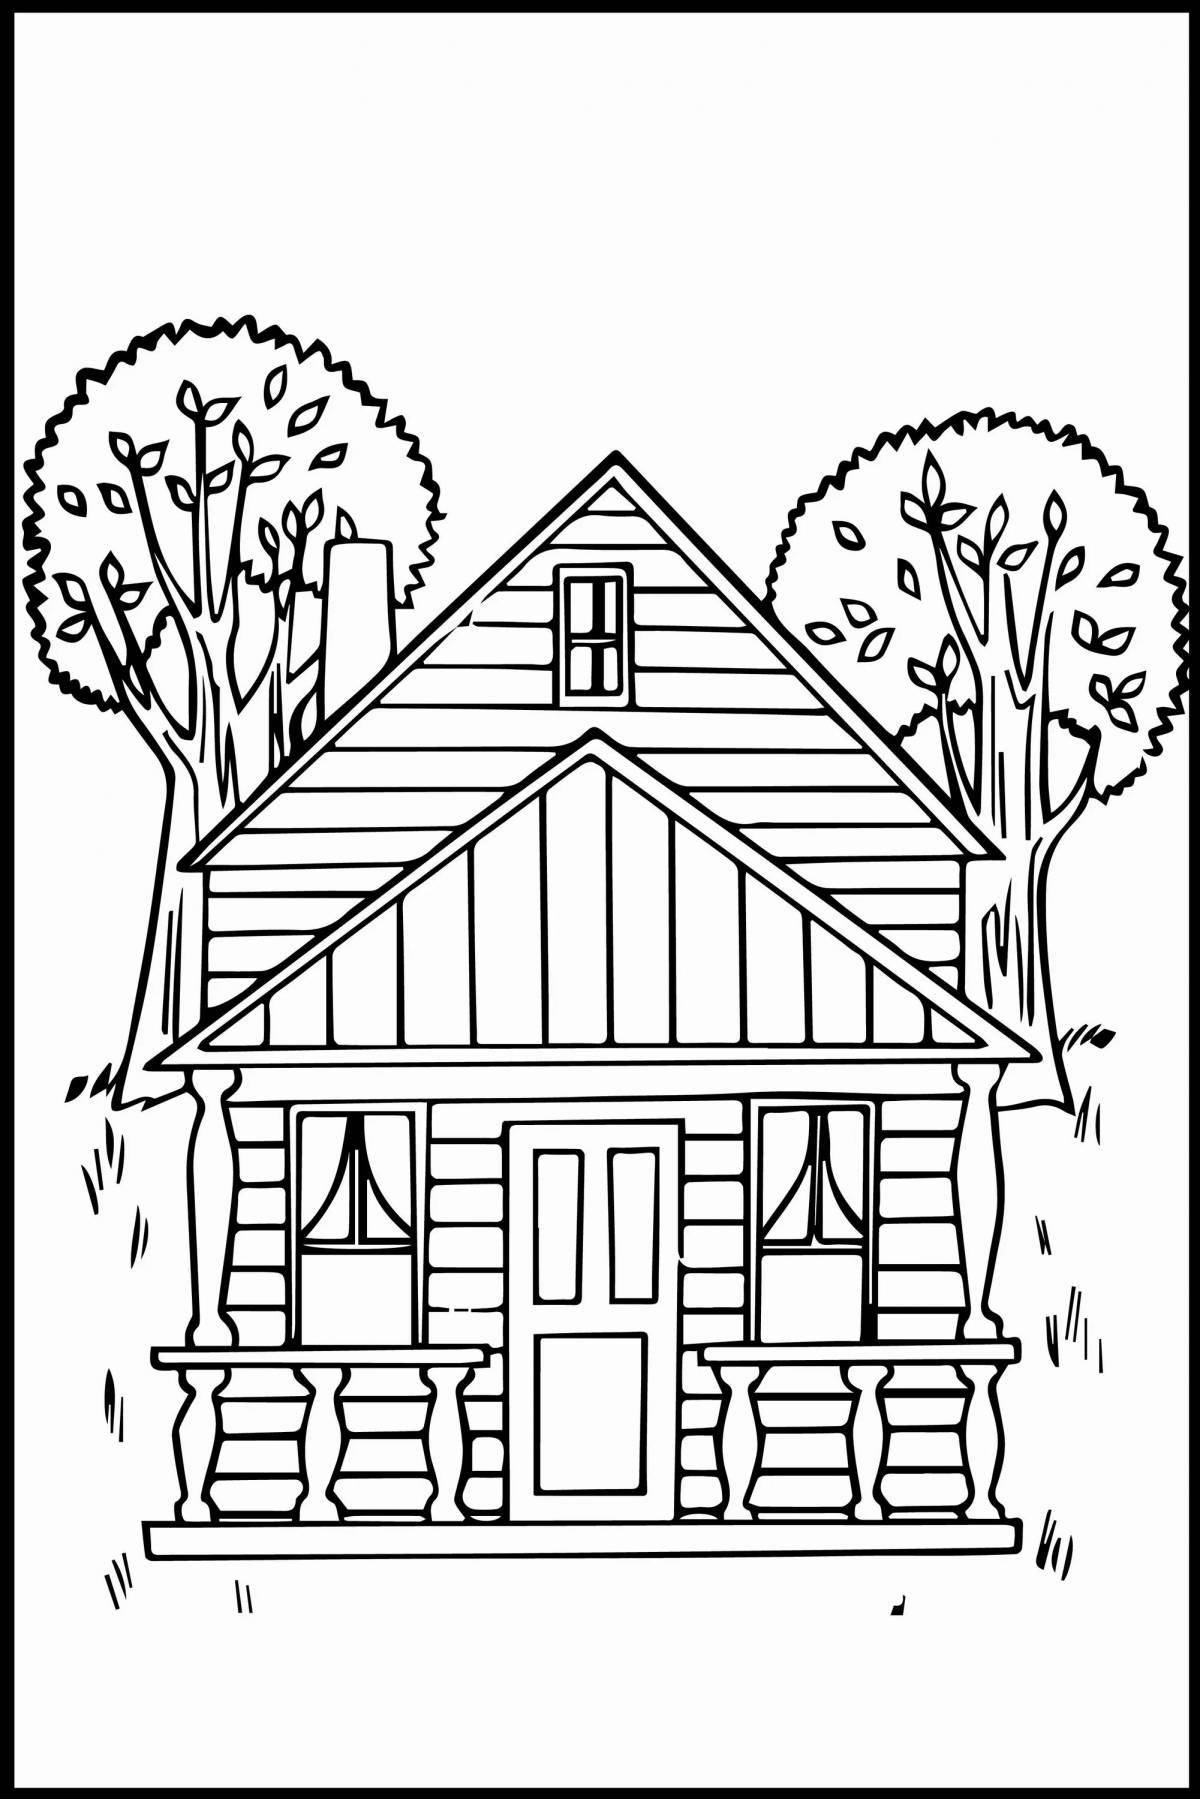 Incredible big house coloring book for kids